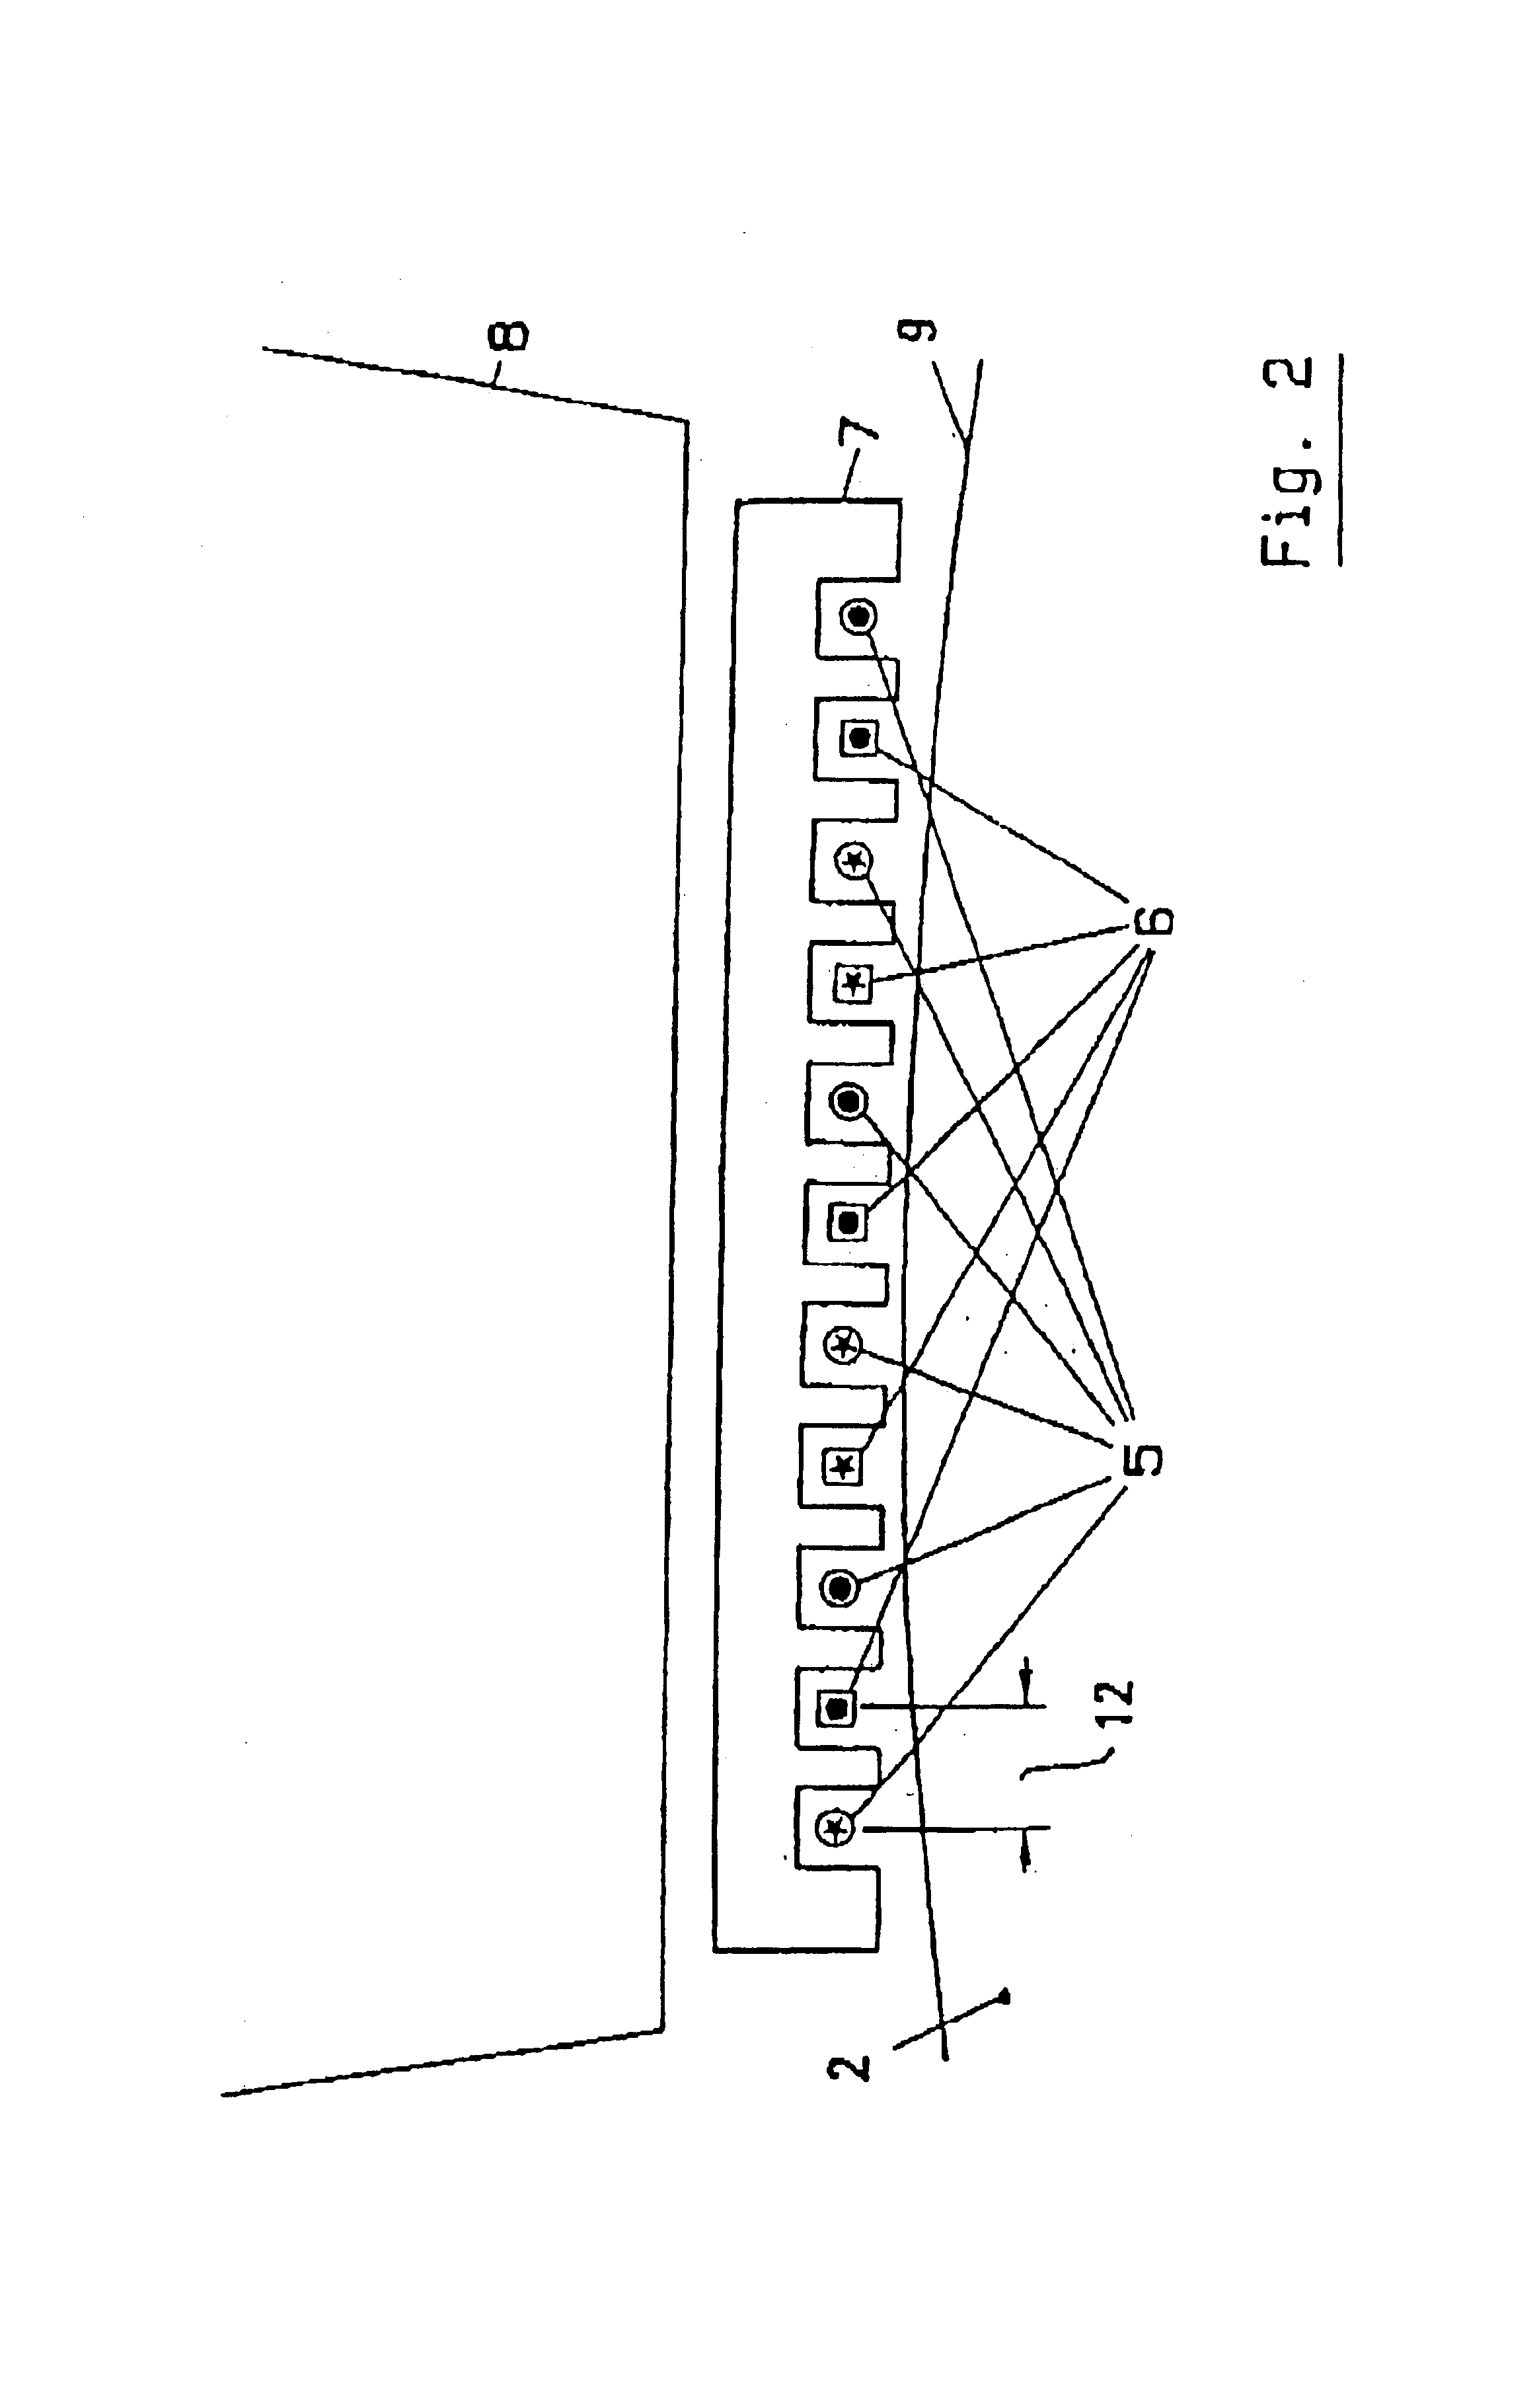 Method of detecting discontinuities on elongated workpieces